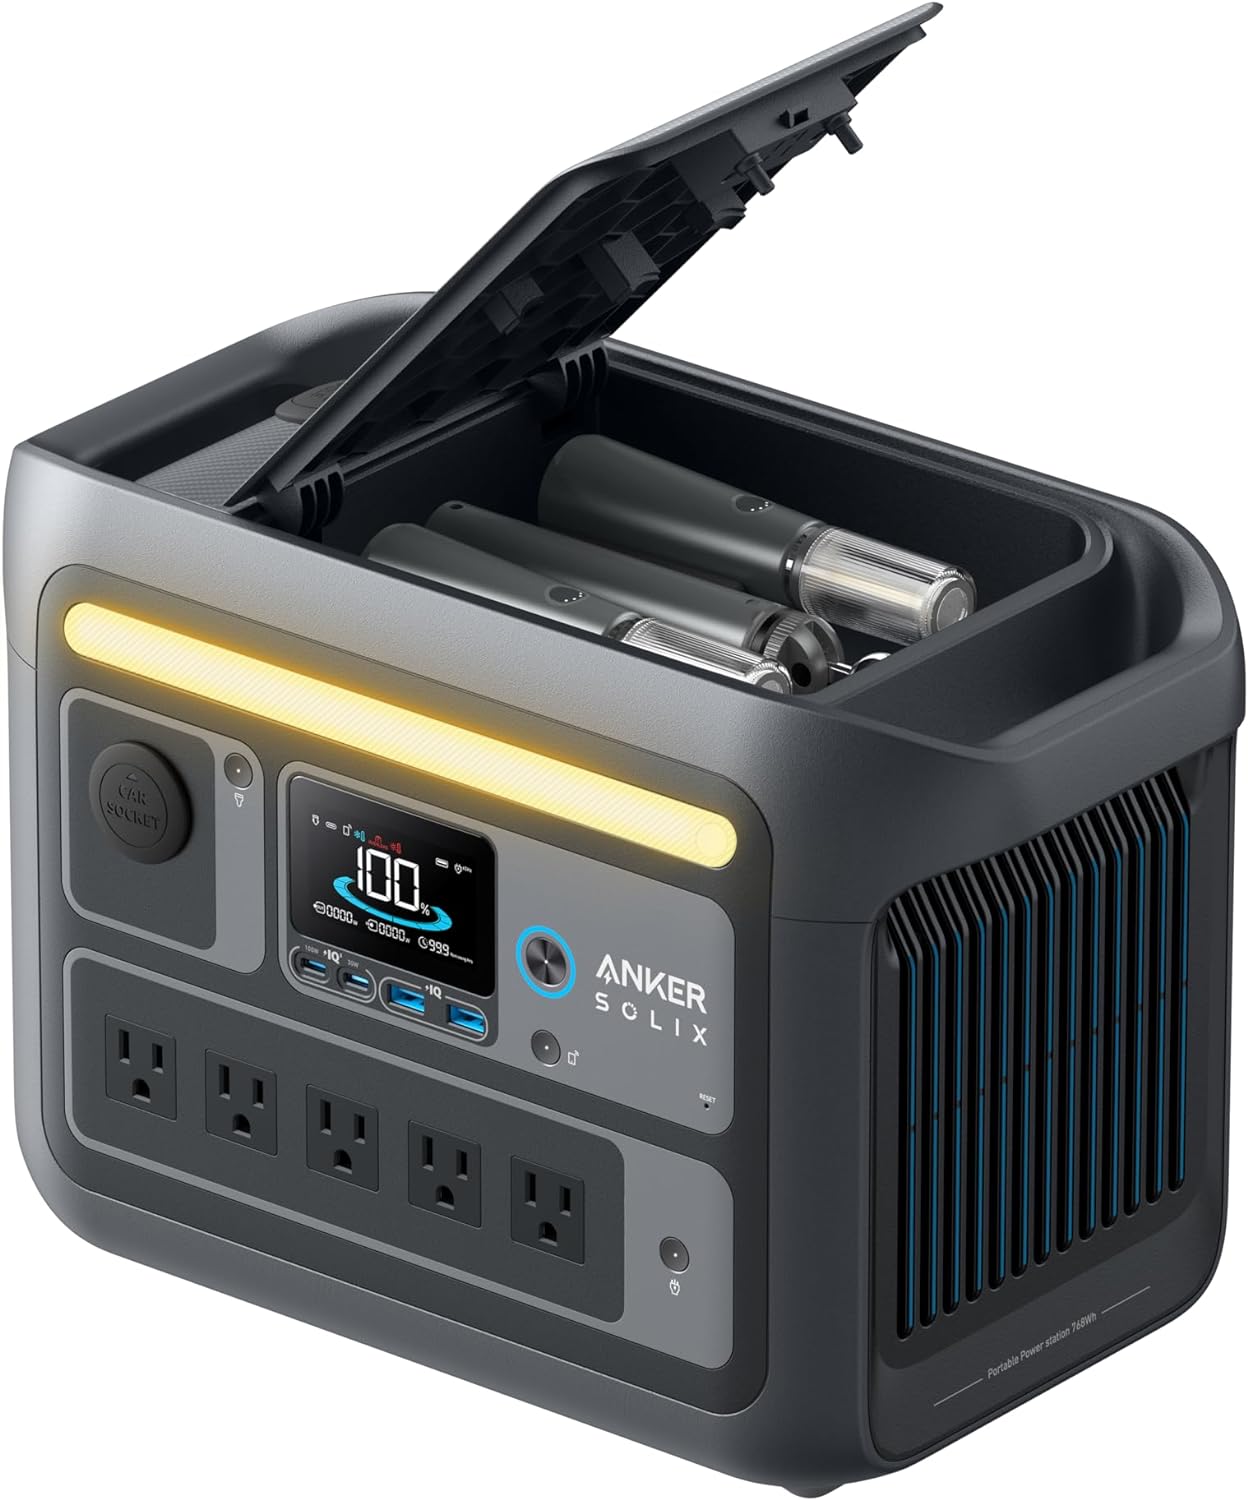 Anker Solix C800 Plus Portable Power Station ポータブル電源 768Wh 58分満充電 高出力AC(定格1200W / 瞬間最大1600W, 5ポート)｜ankerdirect｜02